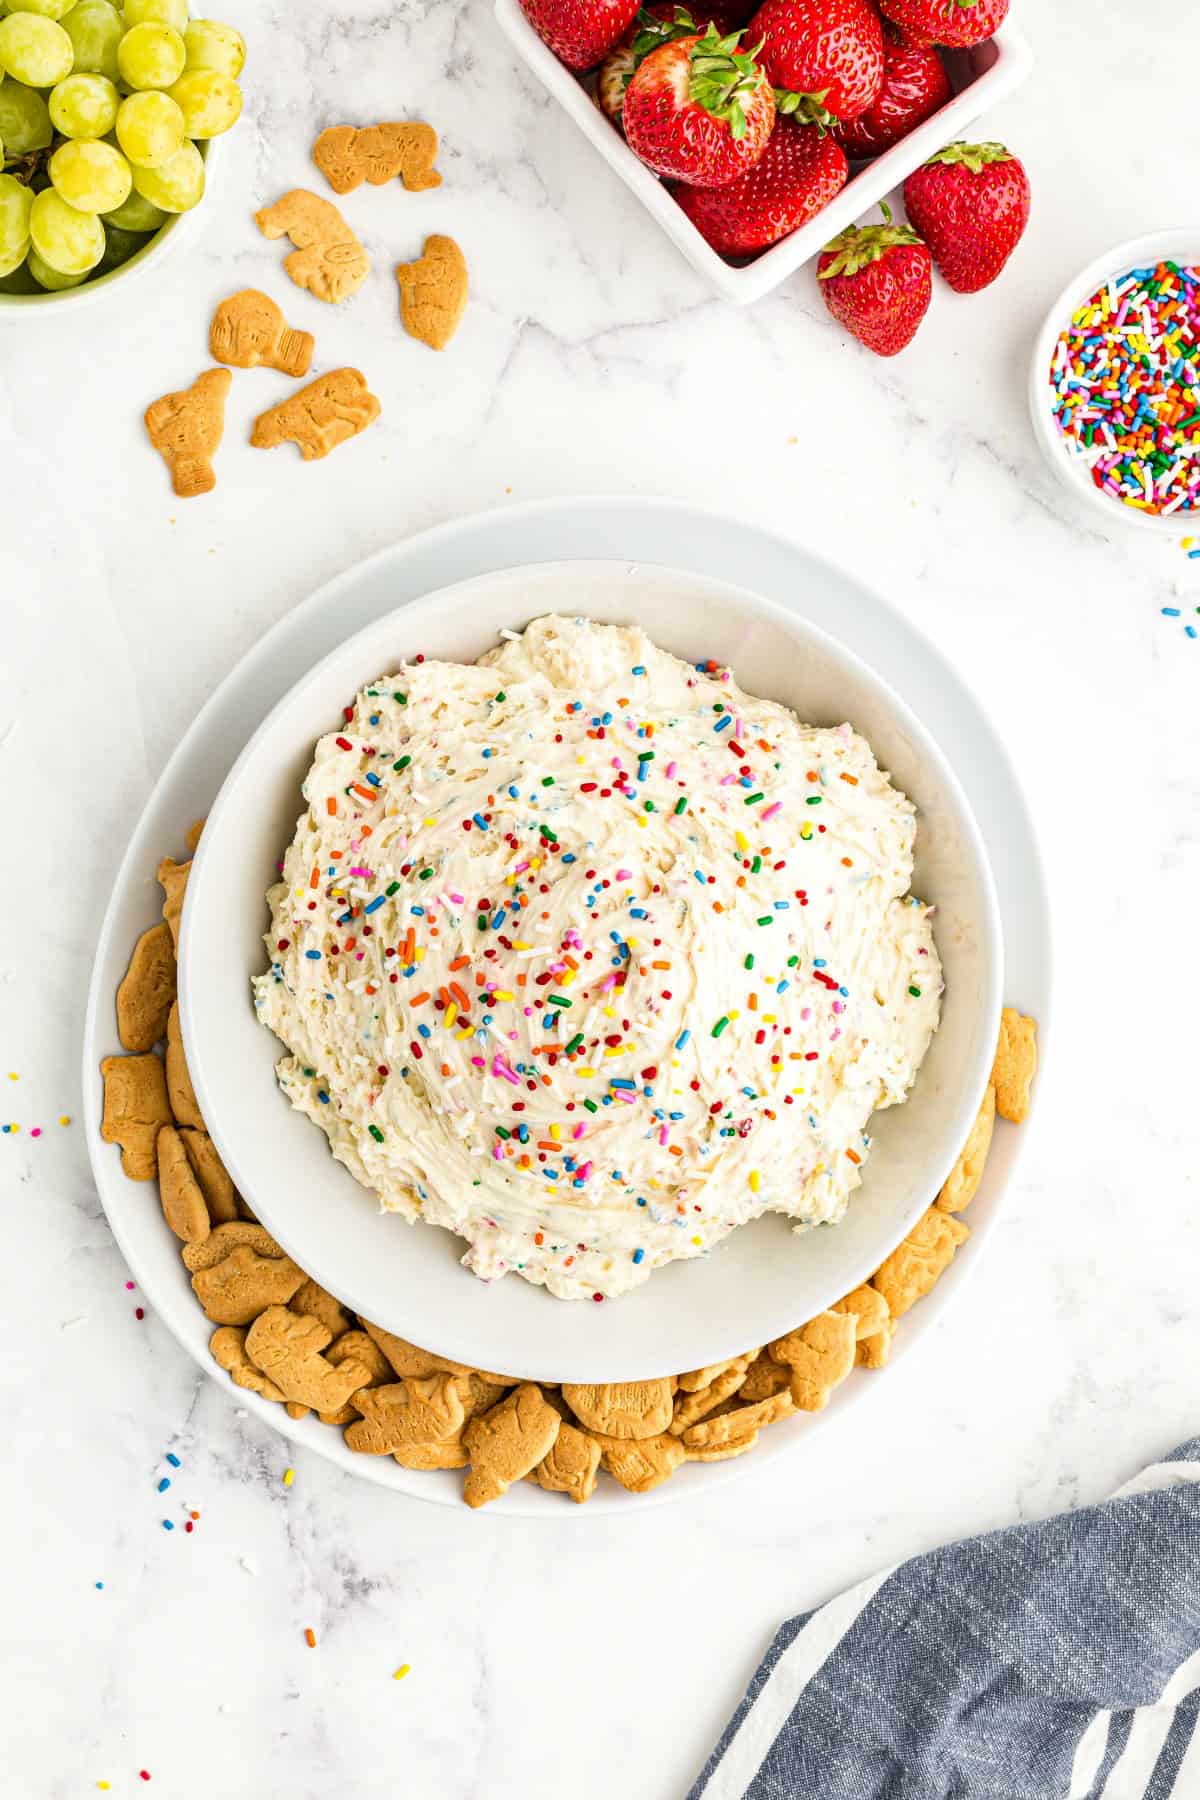 Cake batter dip in a white bowl with sprinkles and served with animal crackers.